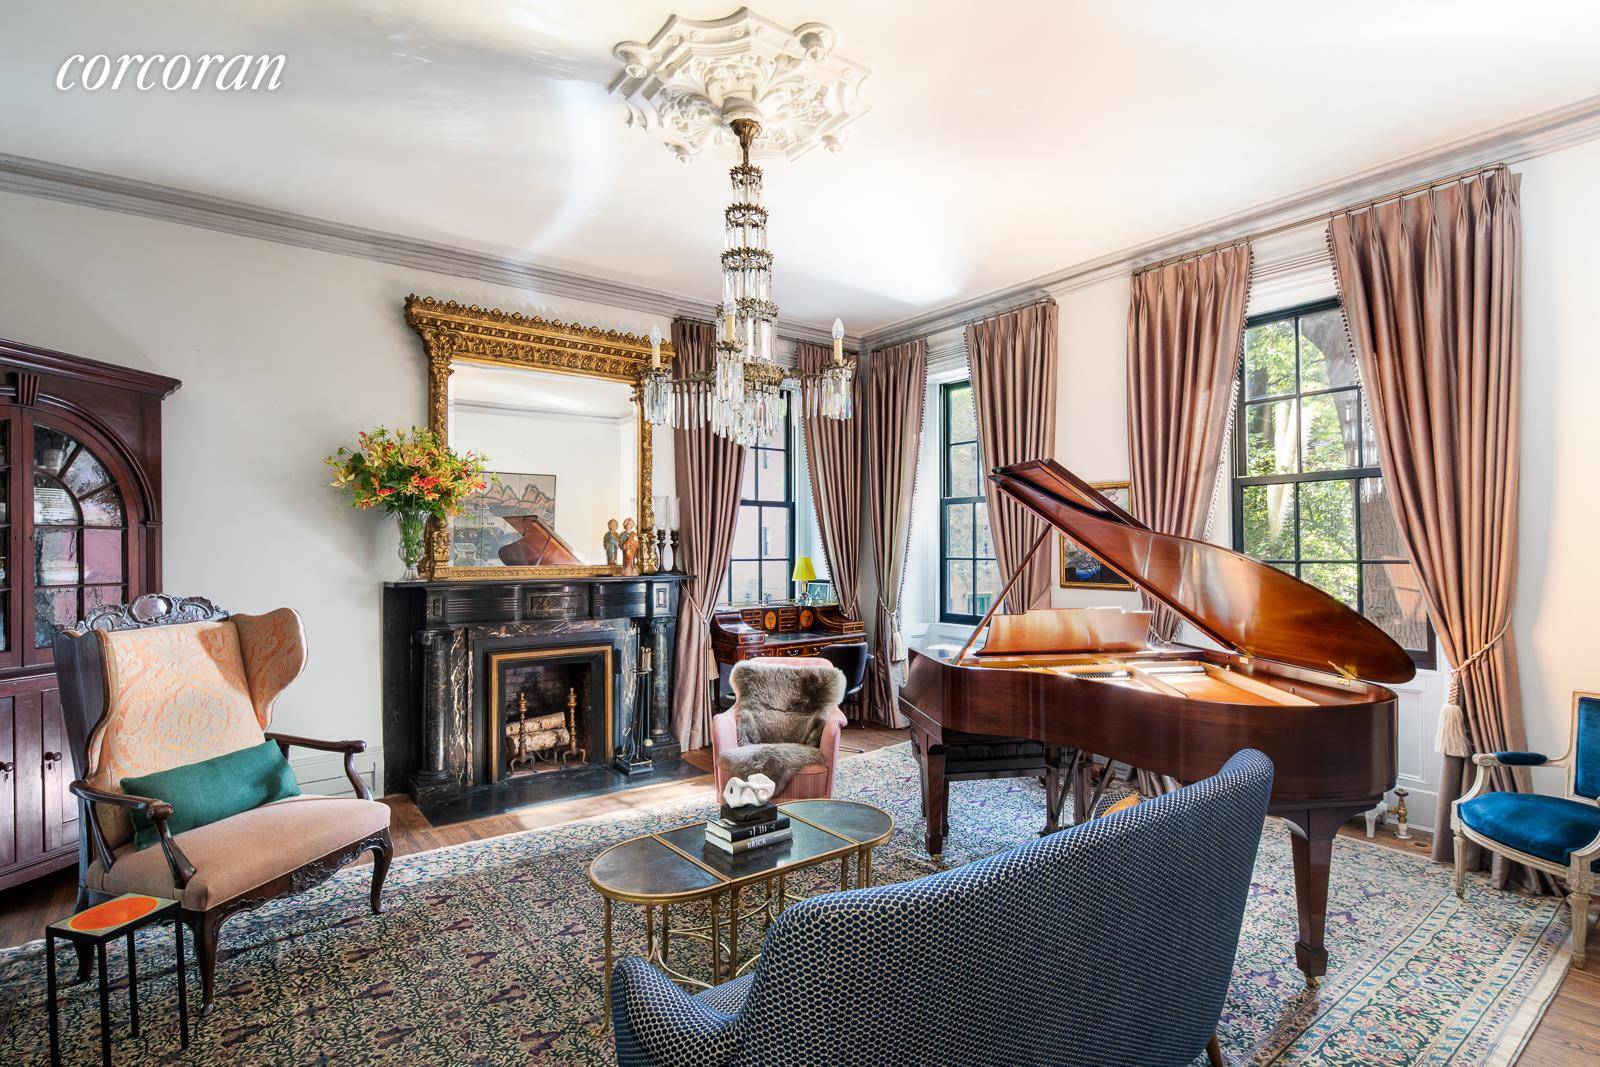 Magnificently restored and renewed four story, five bedroom, three and a half bathroom, single family townhouse in the Brooklyn Heights Historic District.